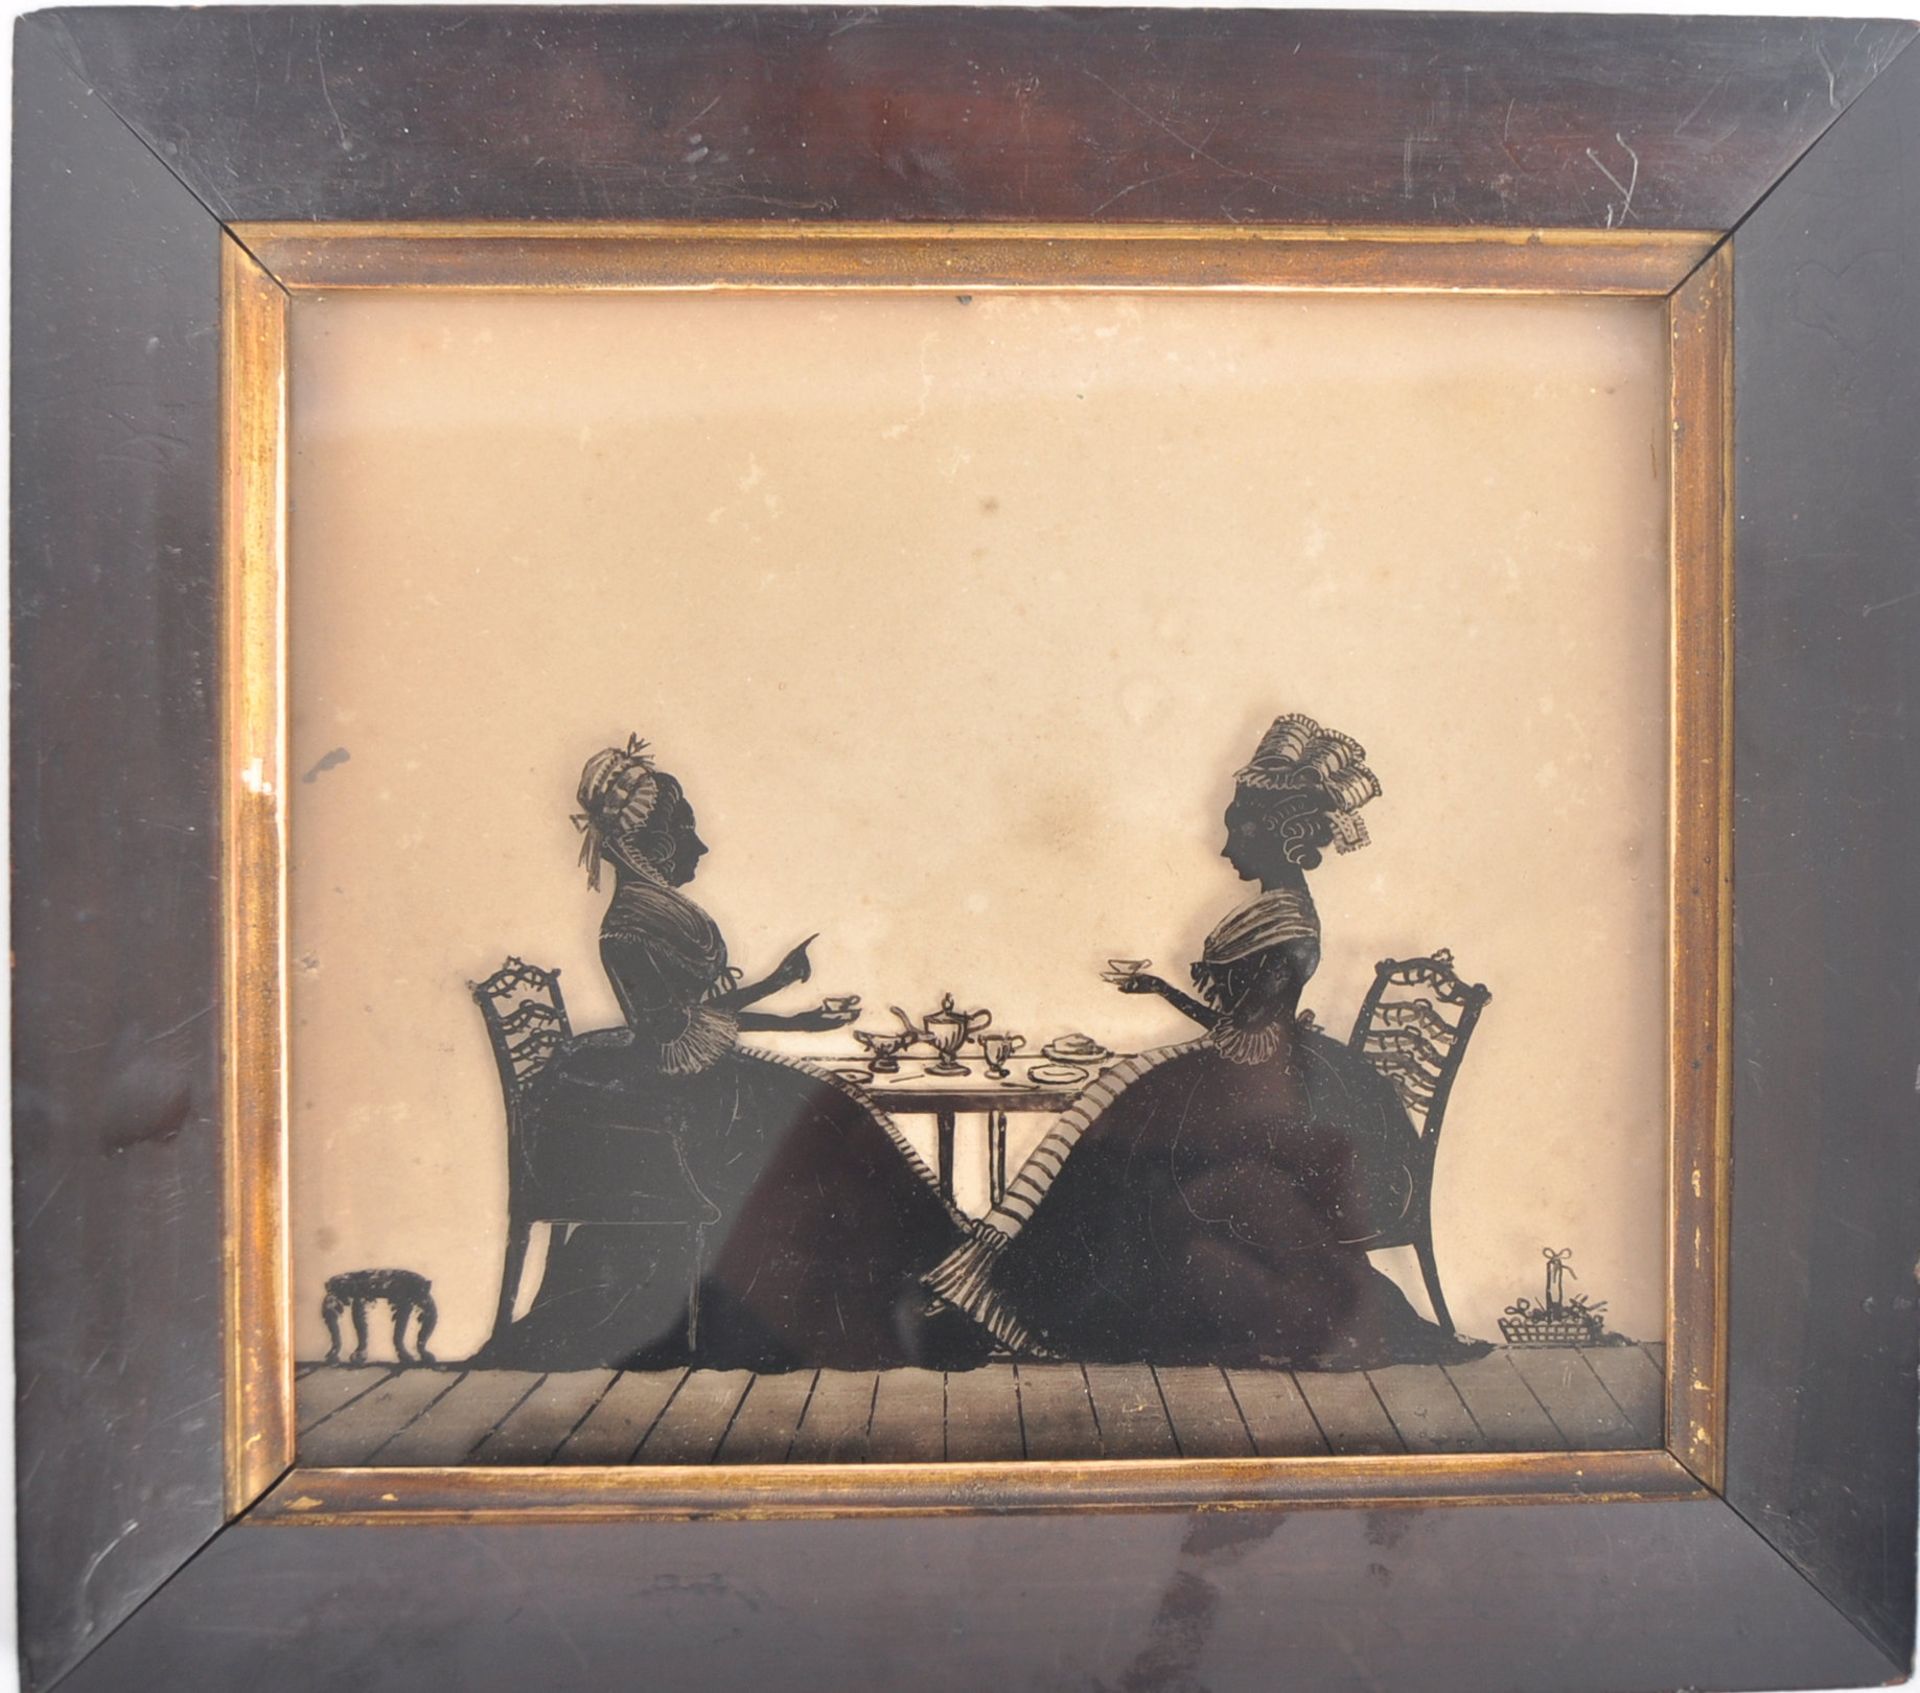 19TH CENTURY REVERSE PAINTED GLASS SILHOUETTE PICTURE